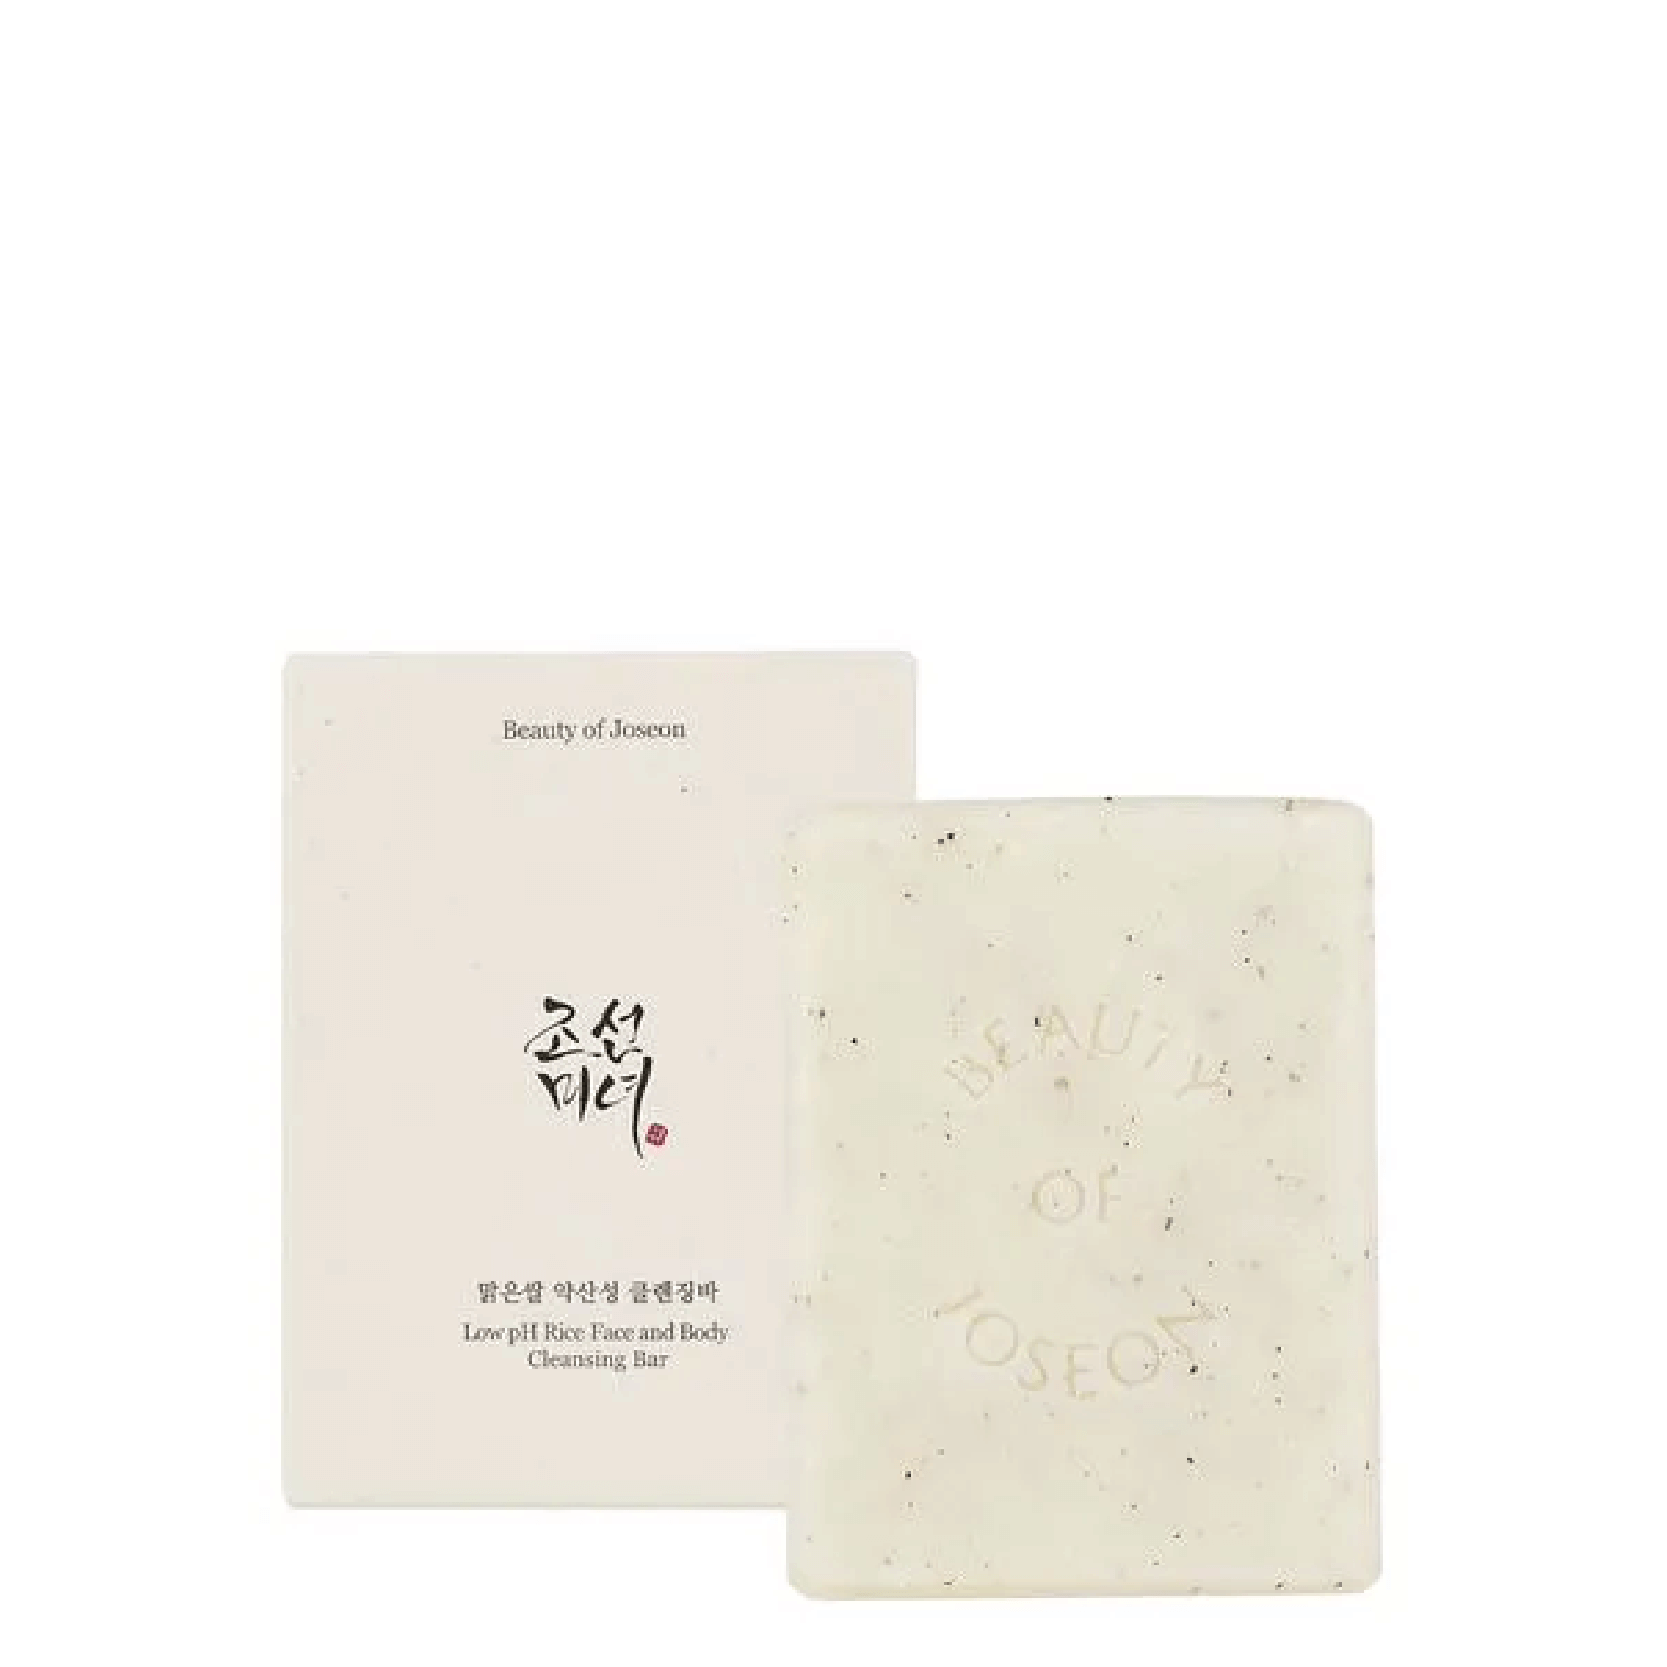 Beauty of Joseon Low pH Rice Face and Body Cleansing Bar Beauty of Joseon